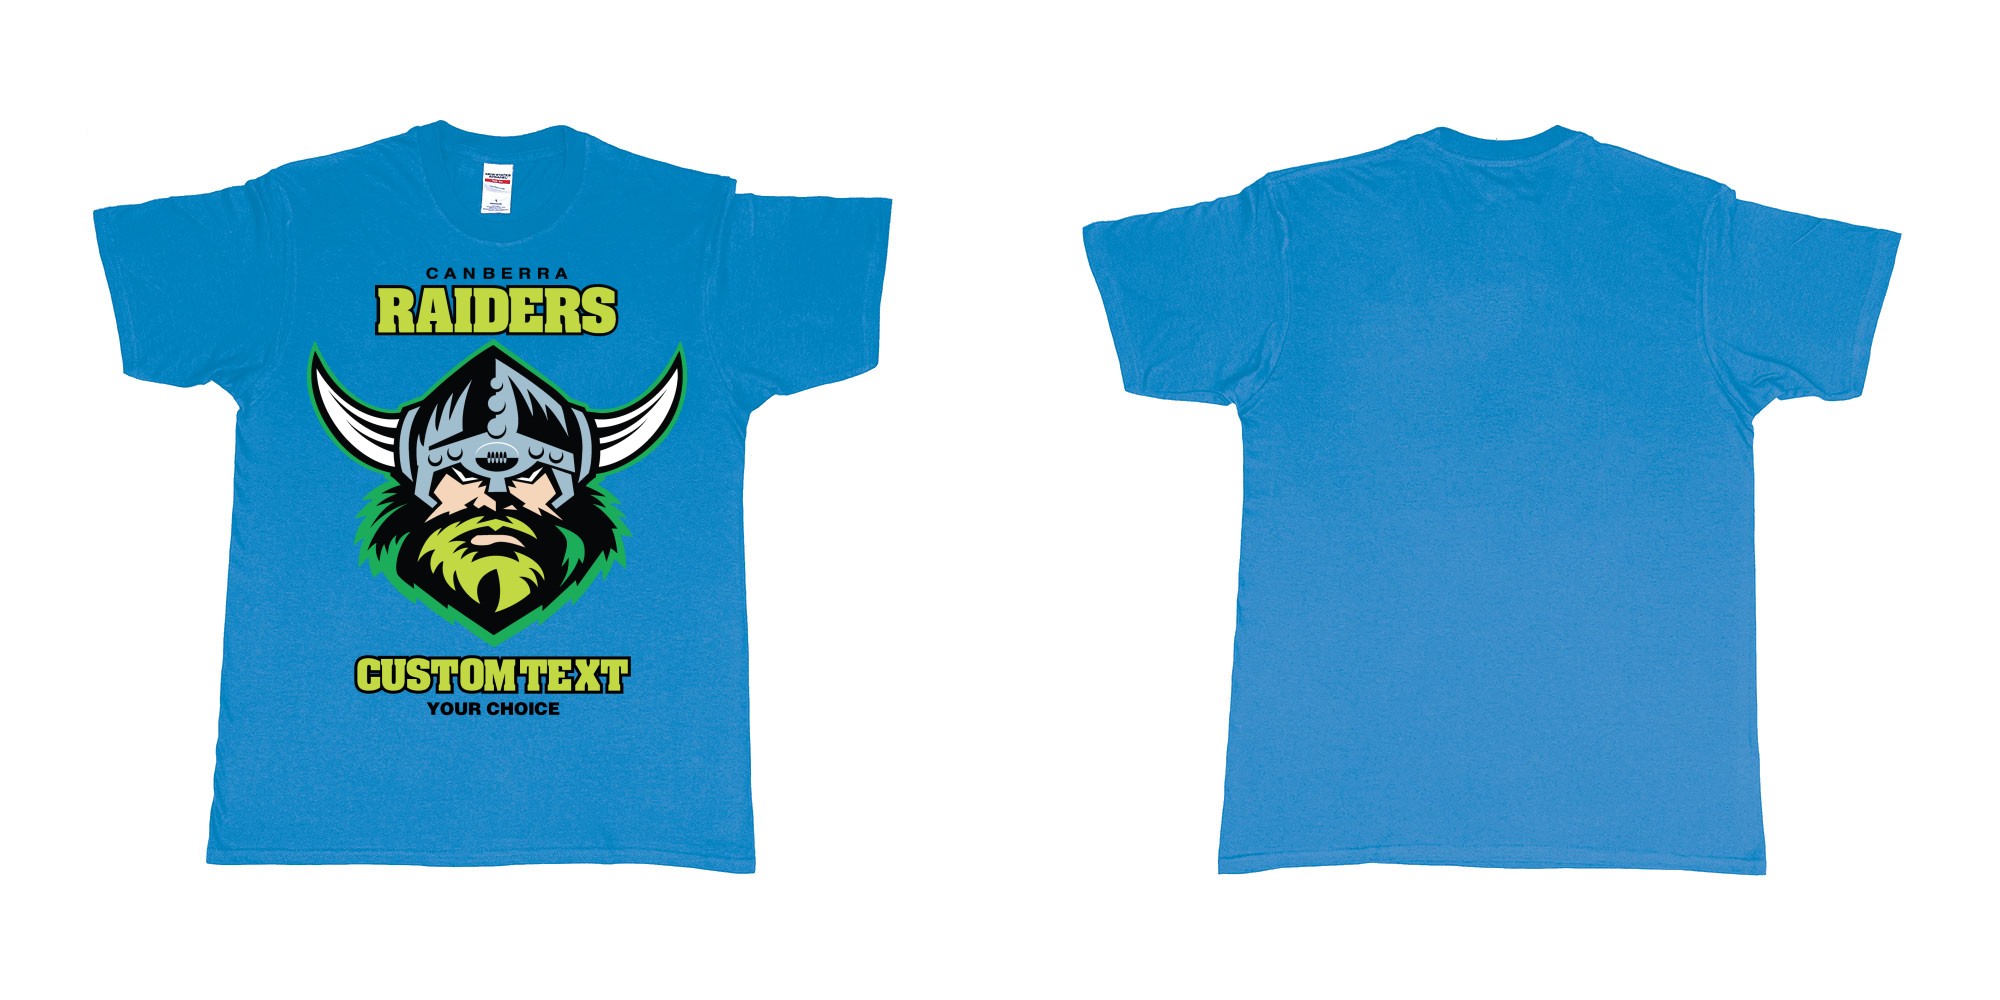 Custom tshirt design canberra raiders nrl logo own printed text near you in fabric color sapphire choice your own text made in Bali by The Pirate Way